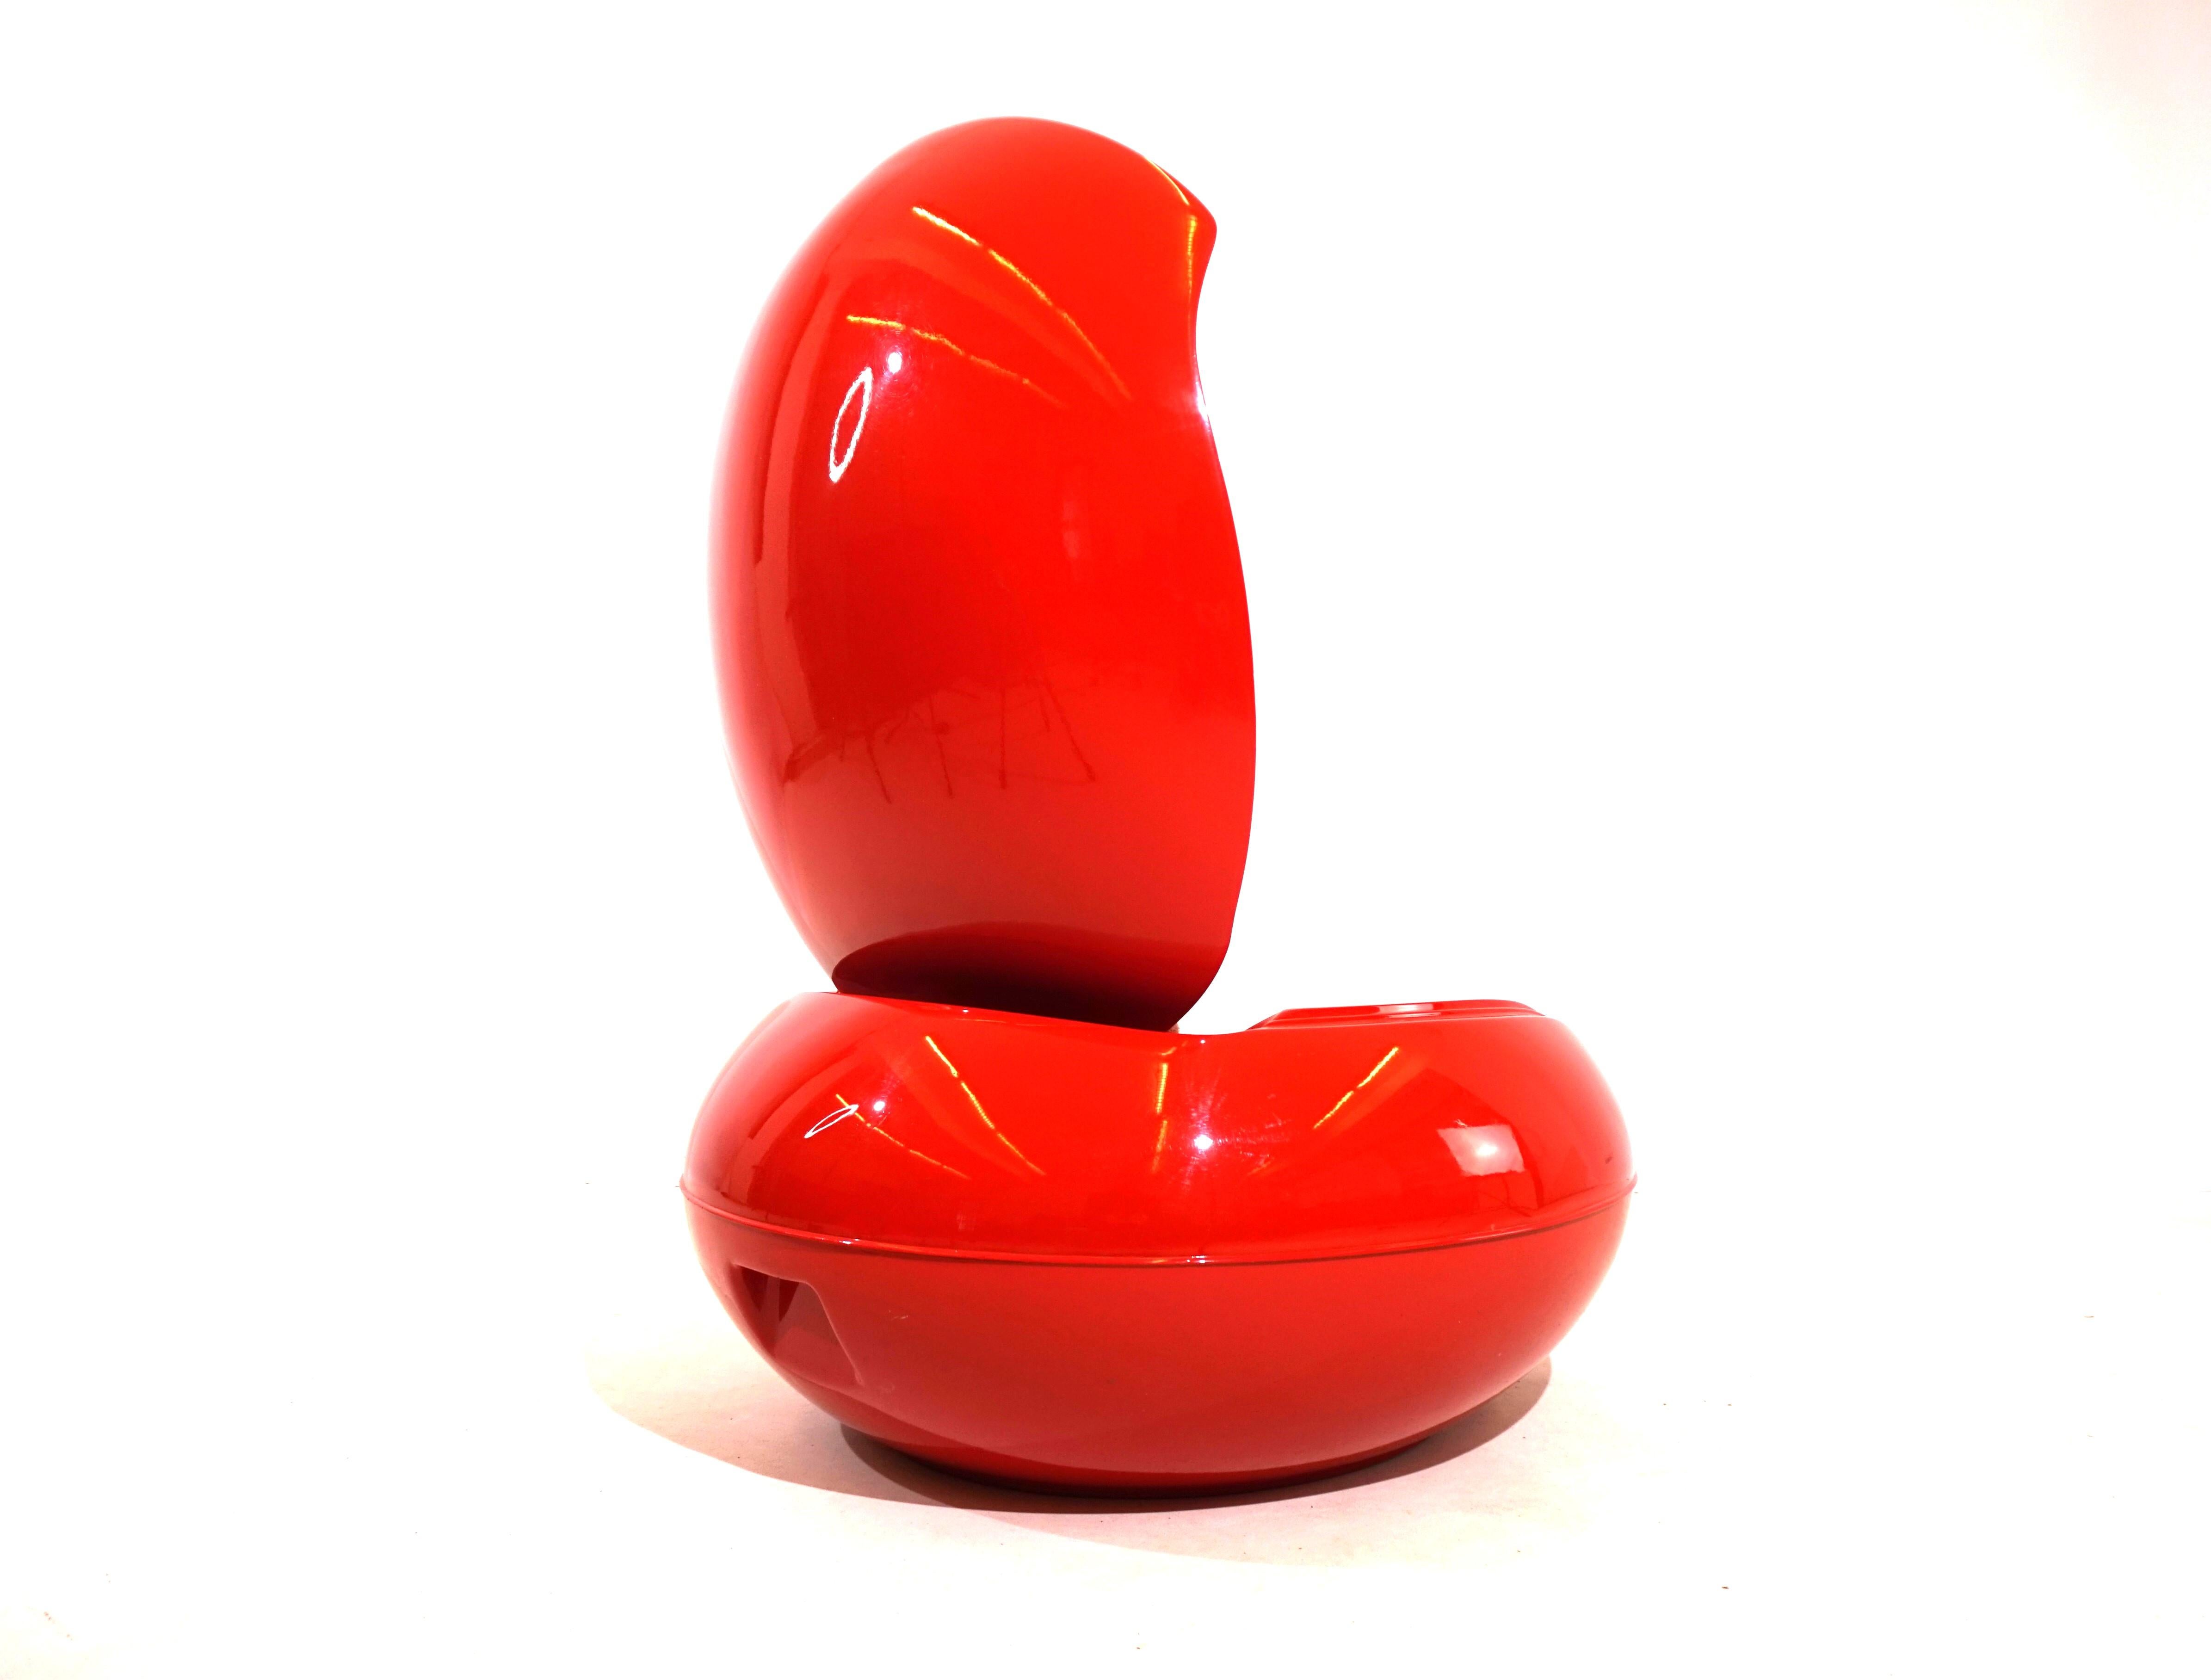 Garden Egg armchair by Peter Ghyczy for Reuter 1